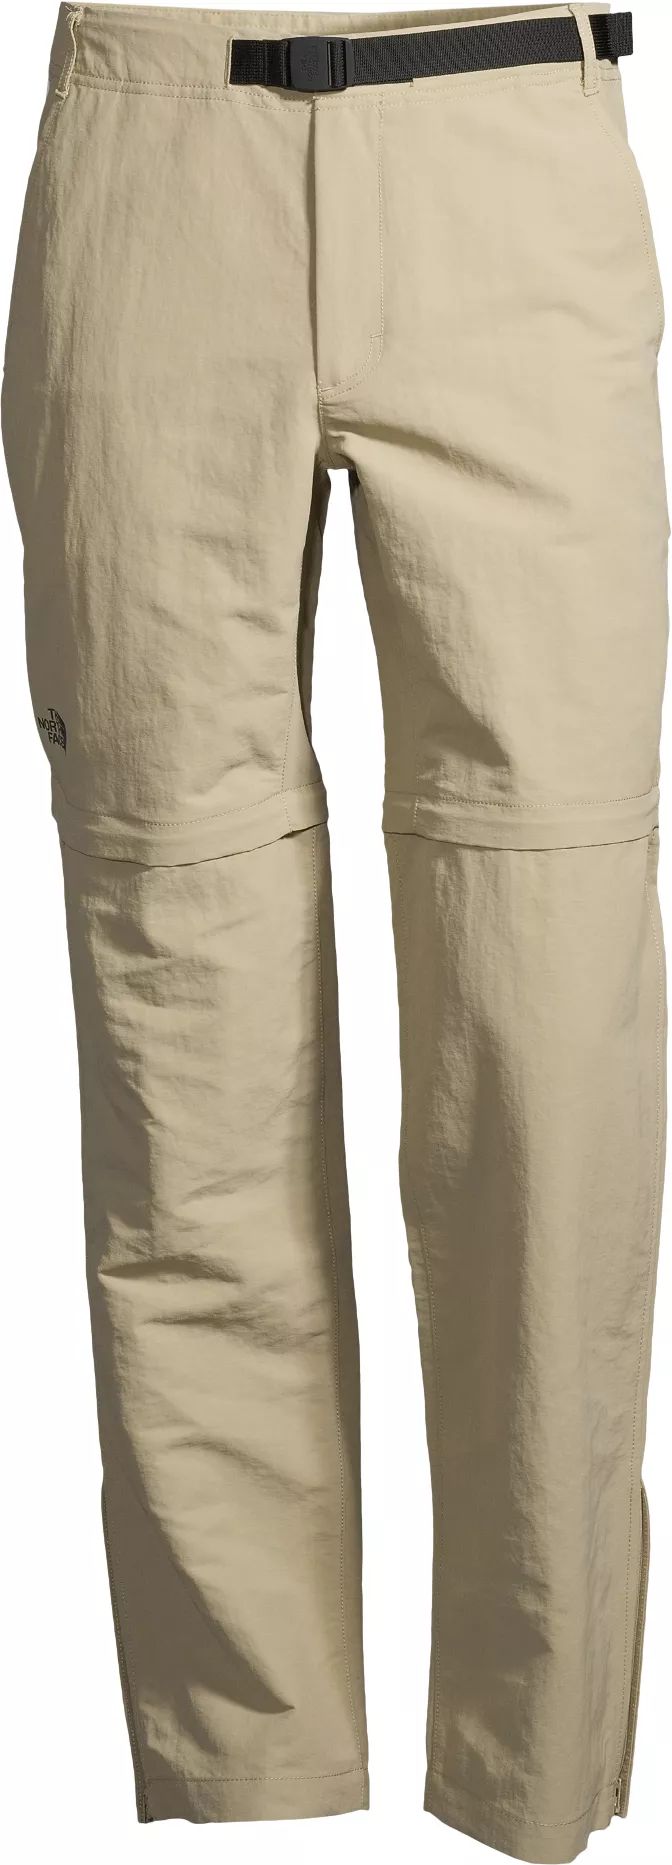 The North Face Paramount Trail Convertible Pants  Mens  REI Coop